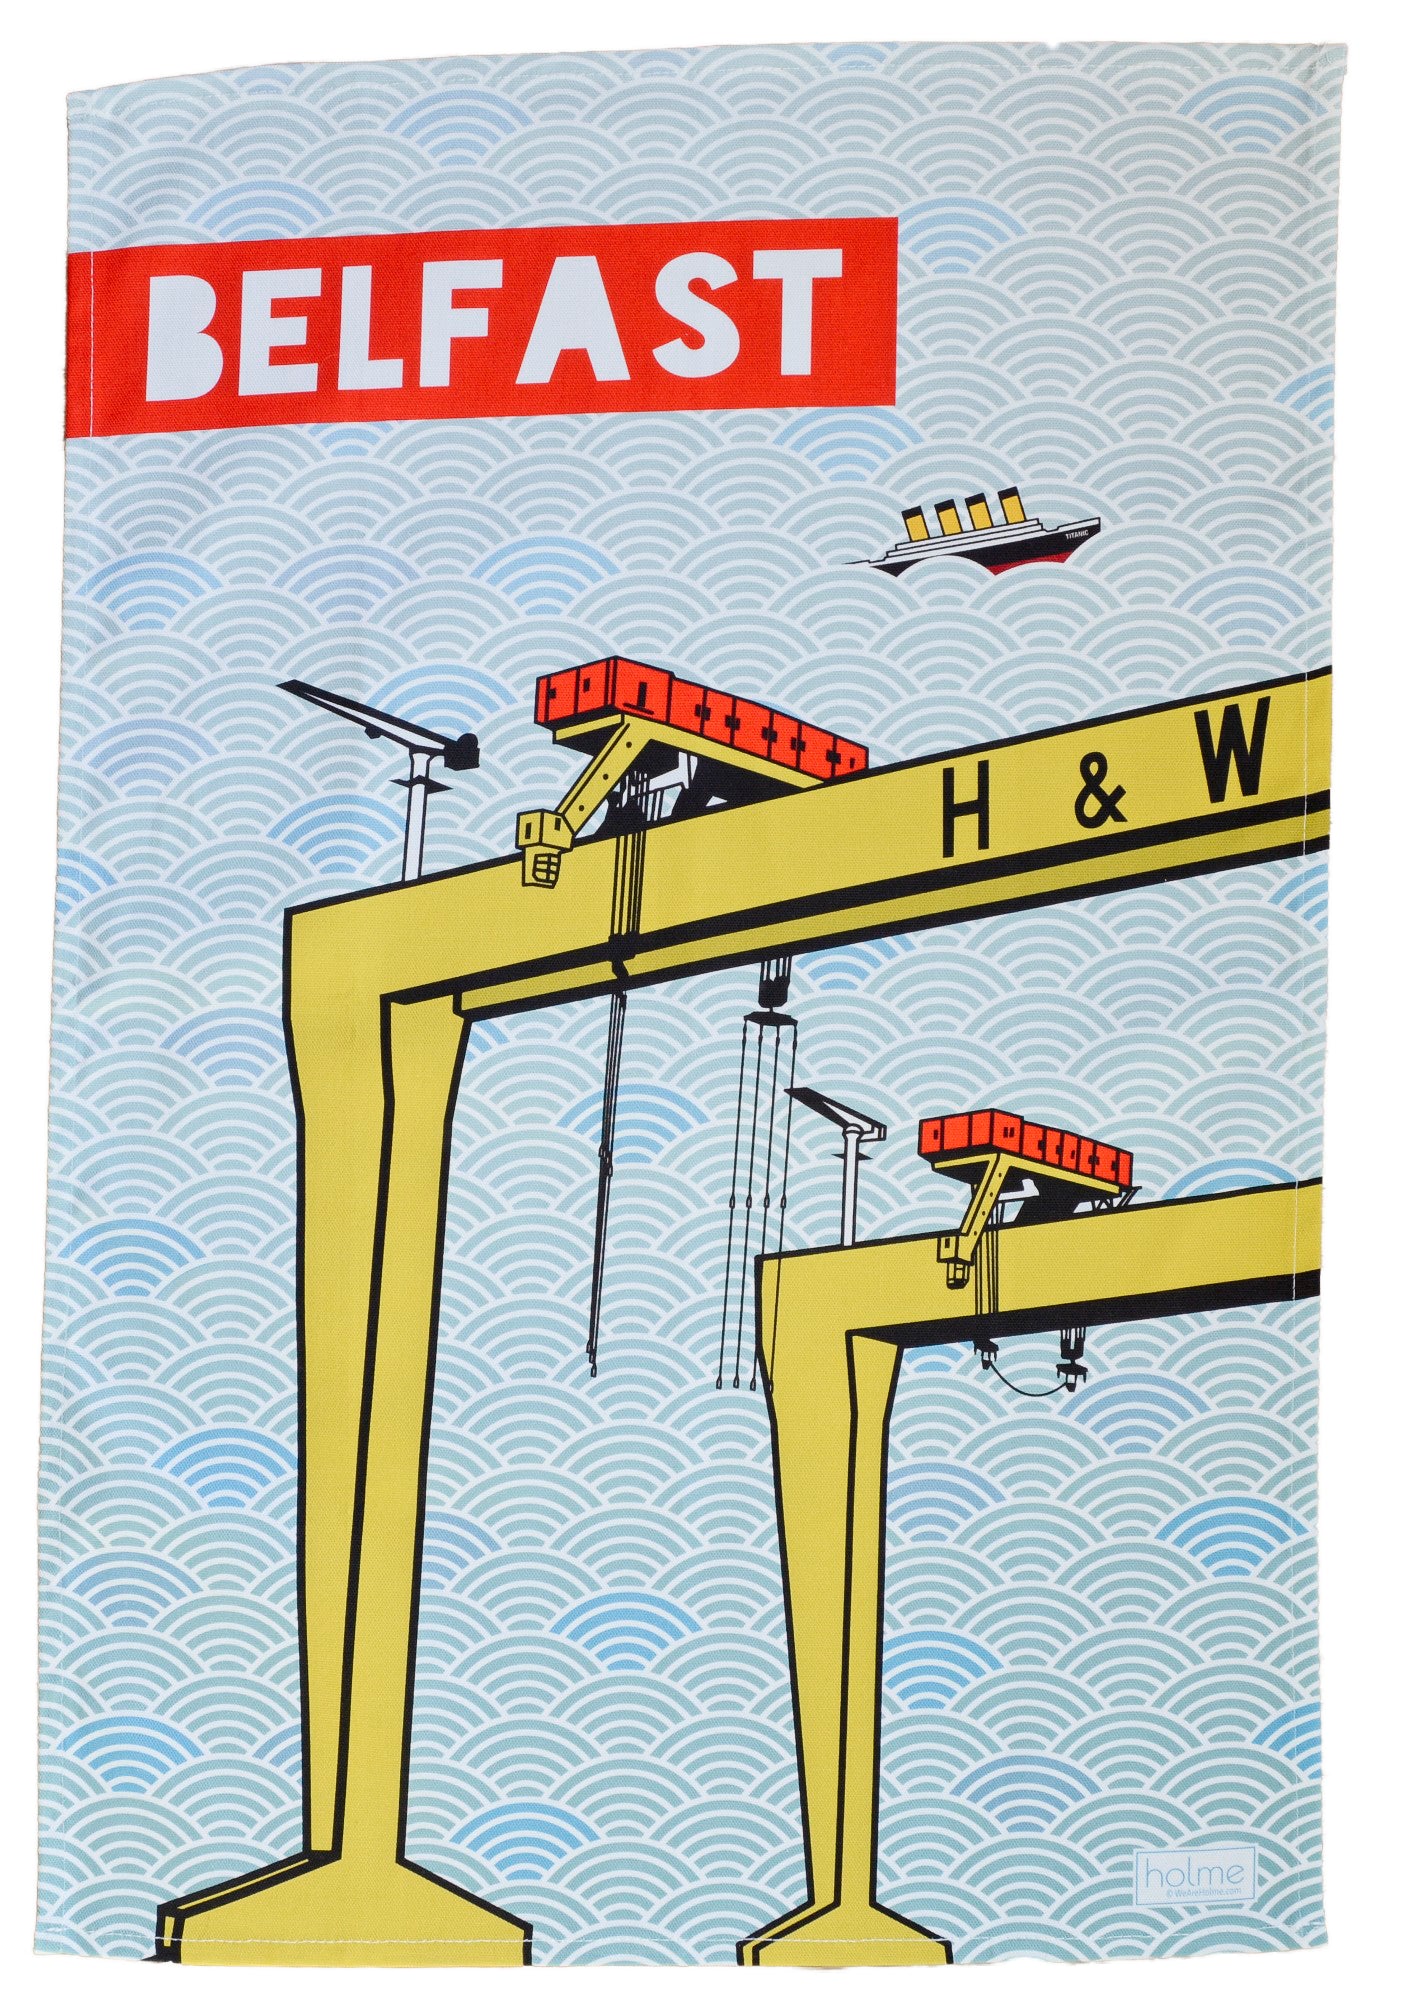 Belfast Tea Towel featuring the Harland and Wolff Cranes showing full opened up view of the product.